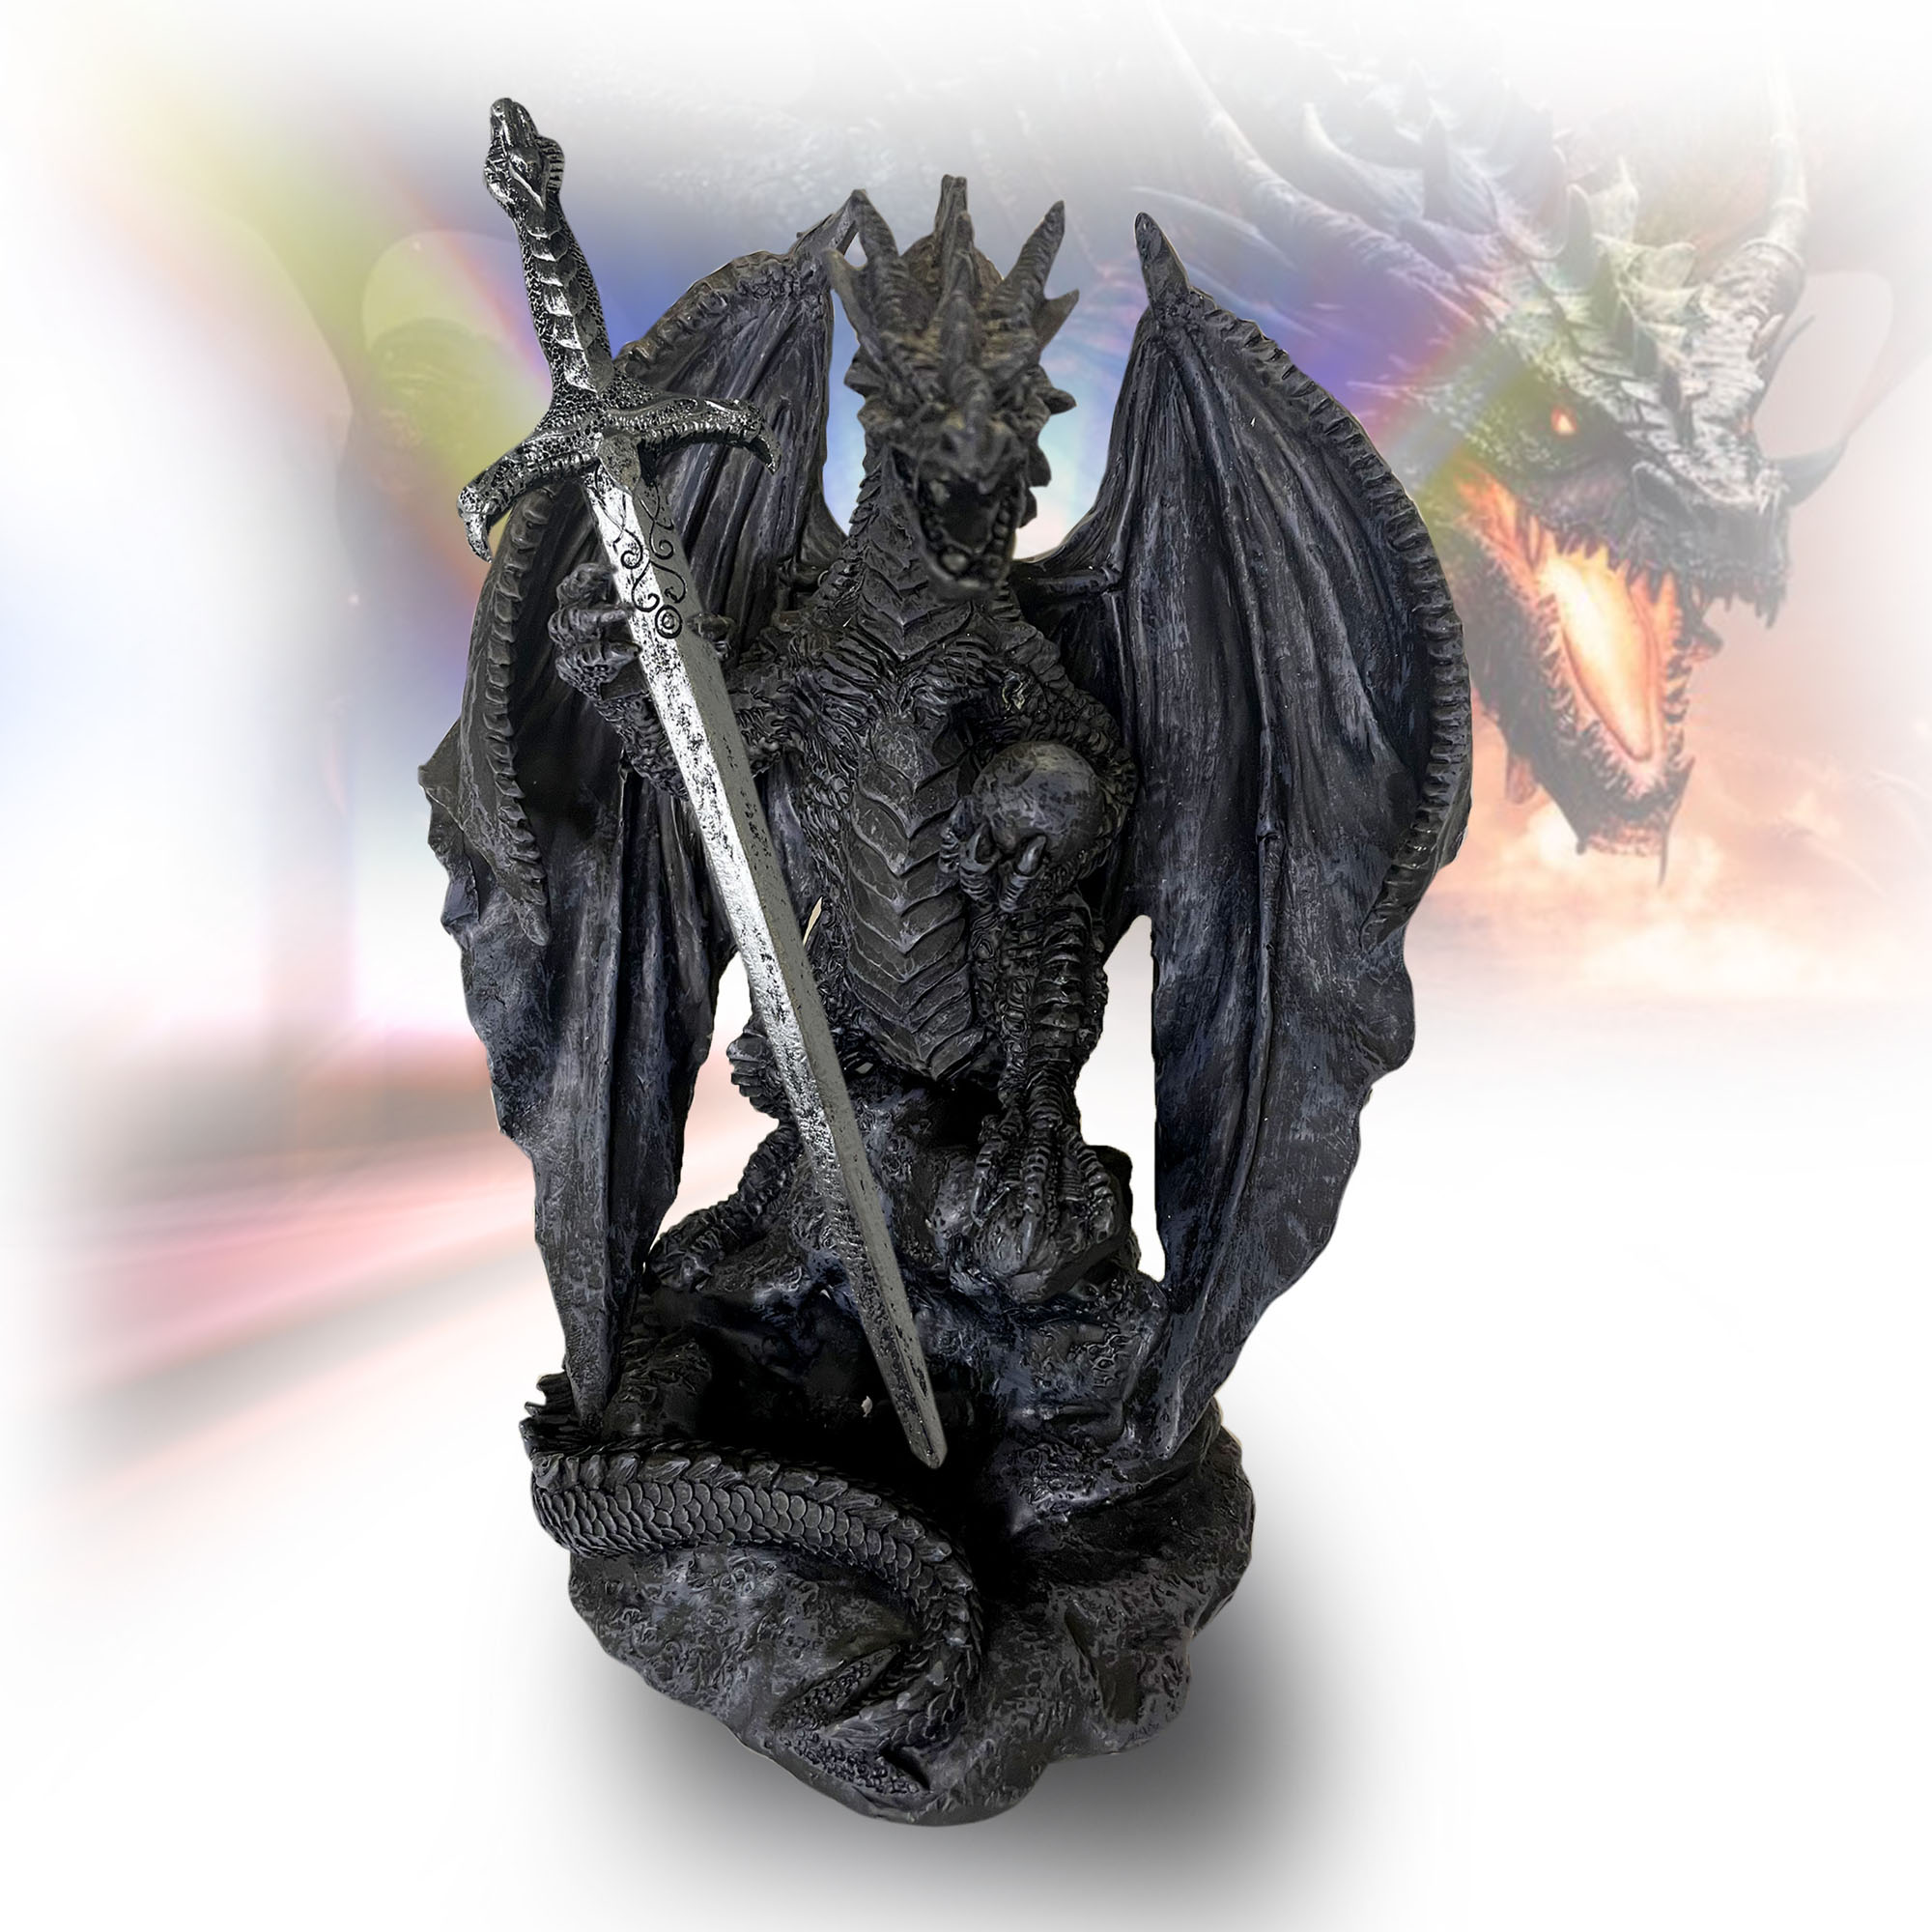 Dragon with sword made of Resin